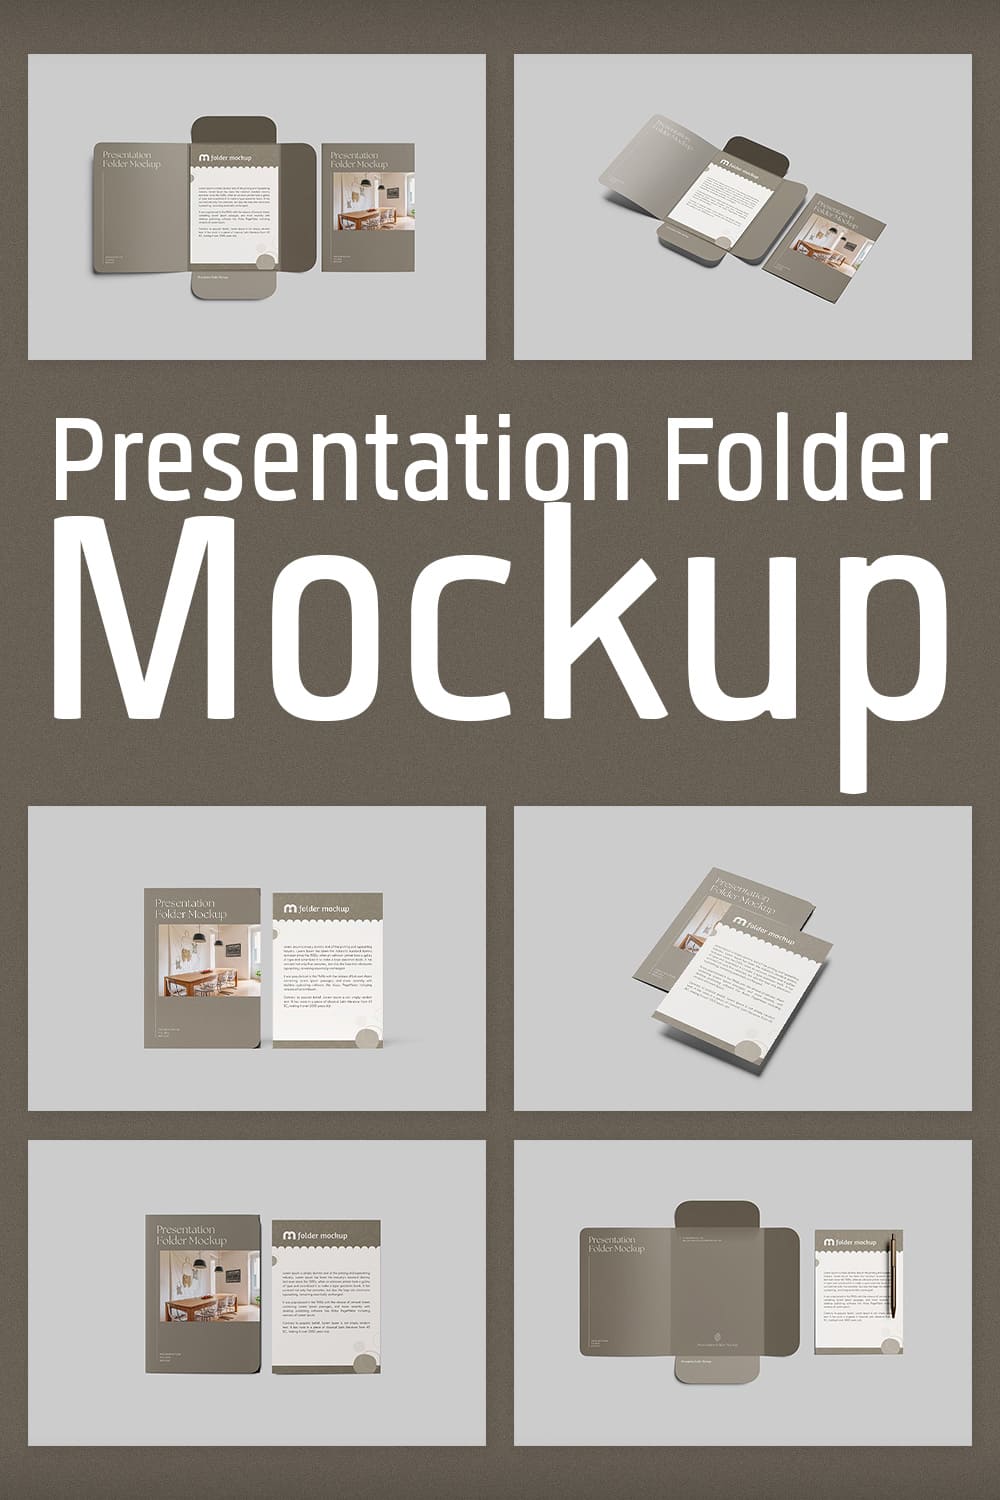 A selection of images of presentation folders with a wonderful design.